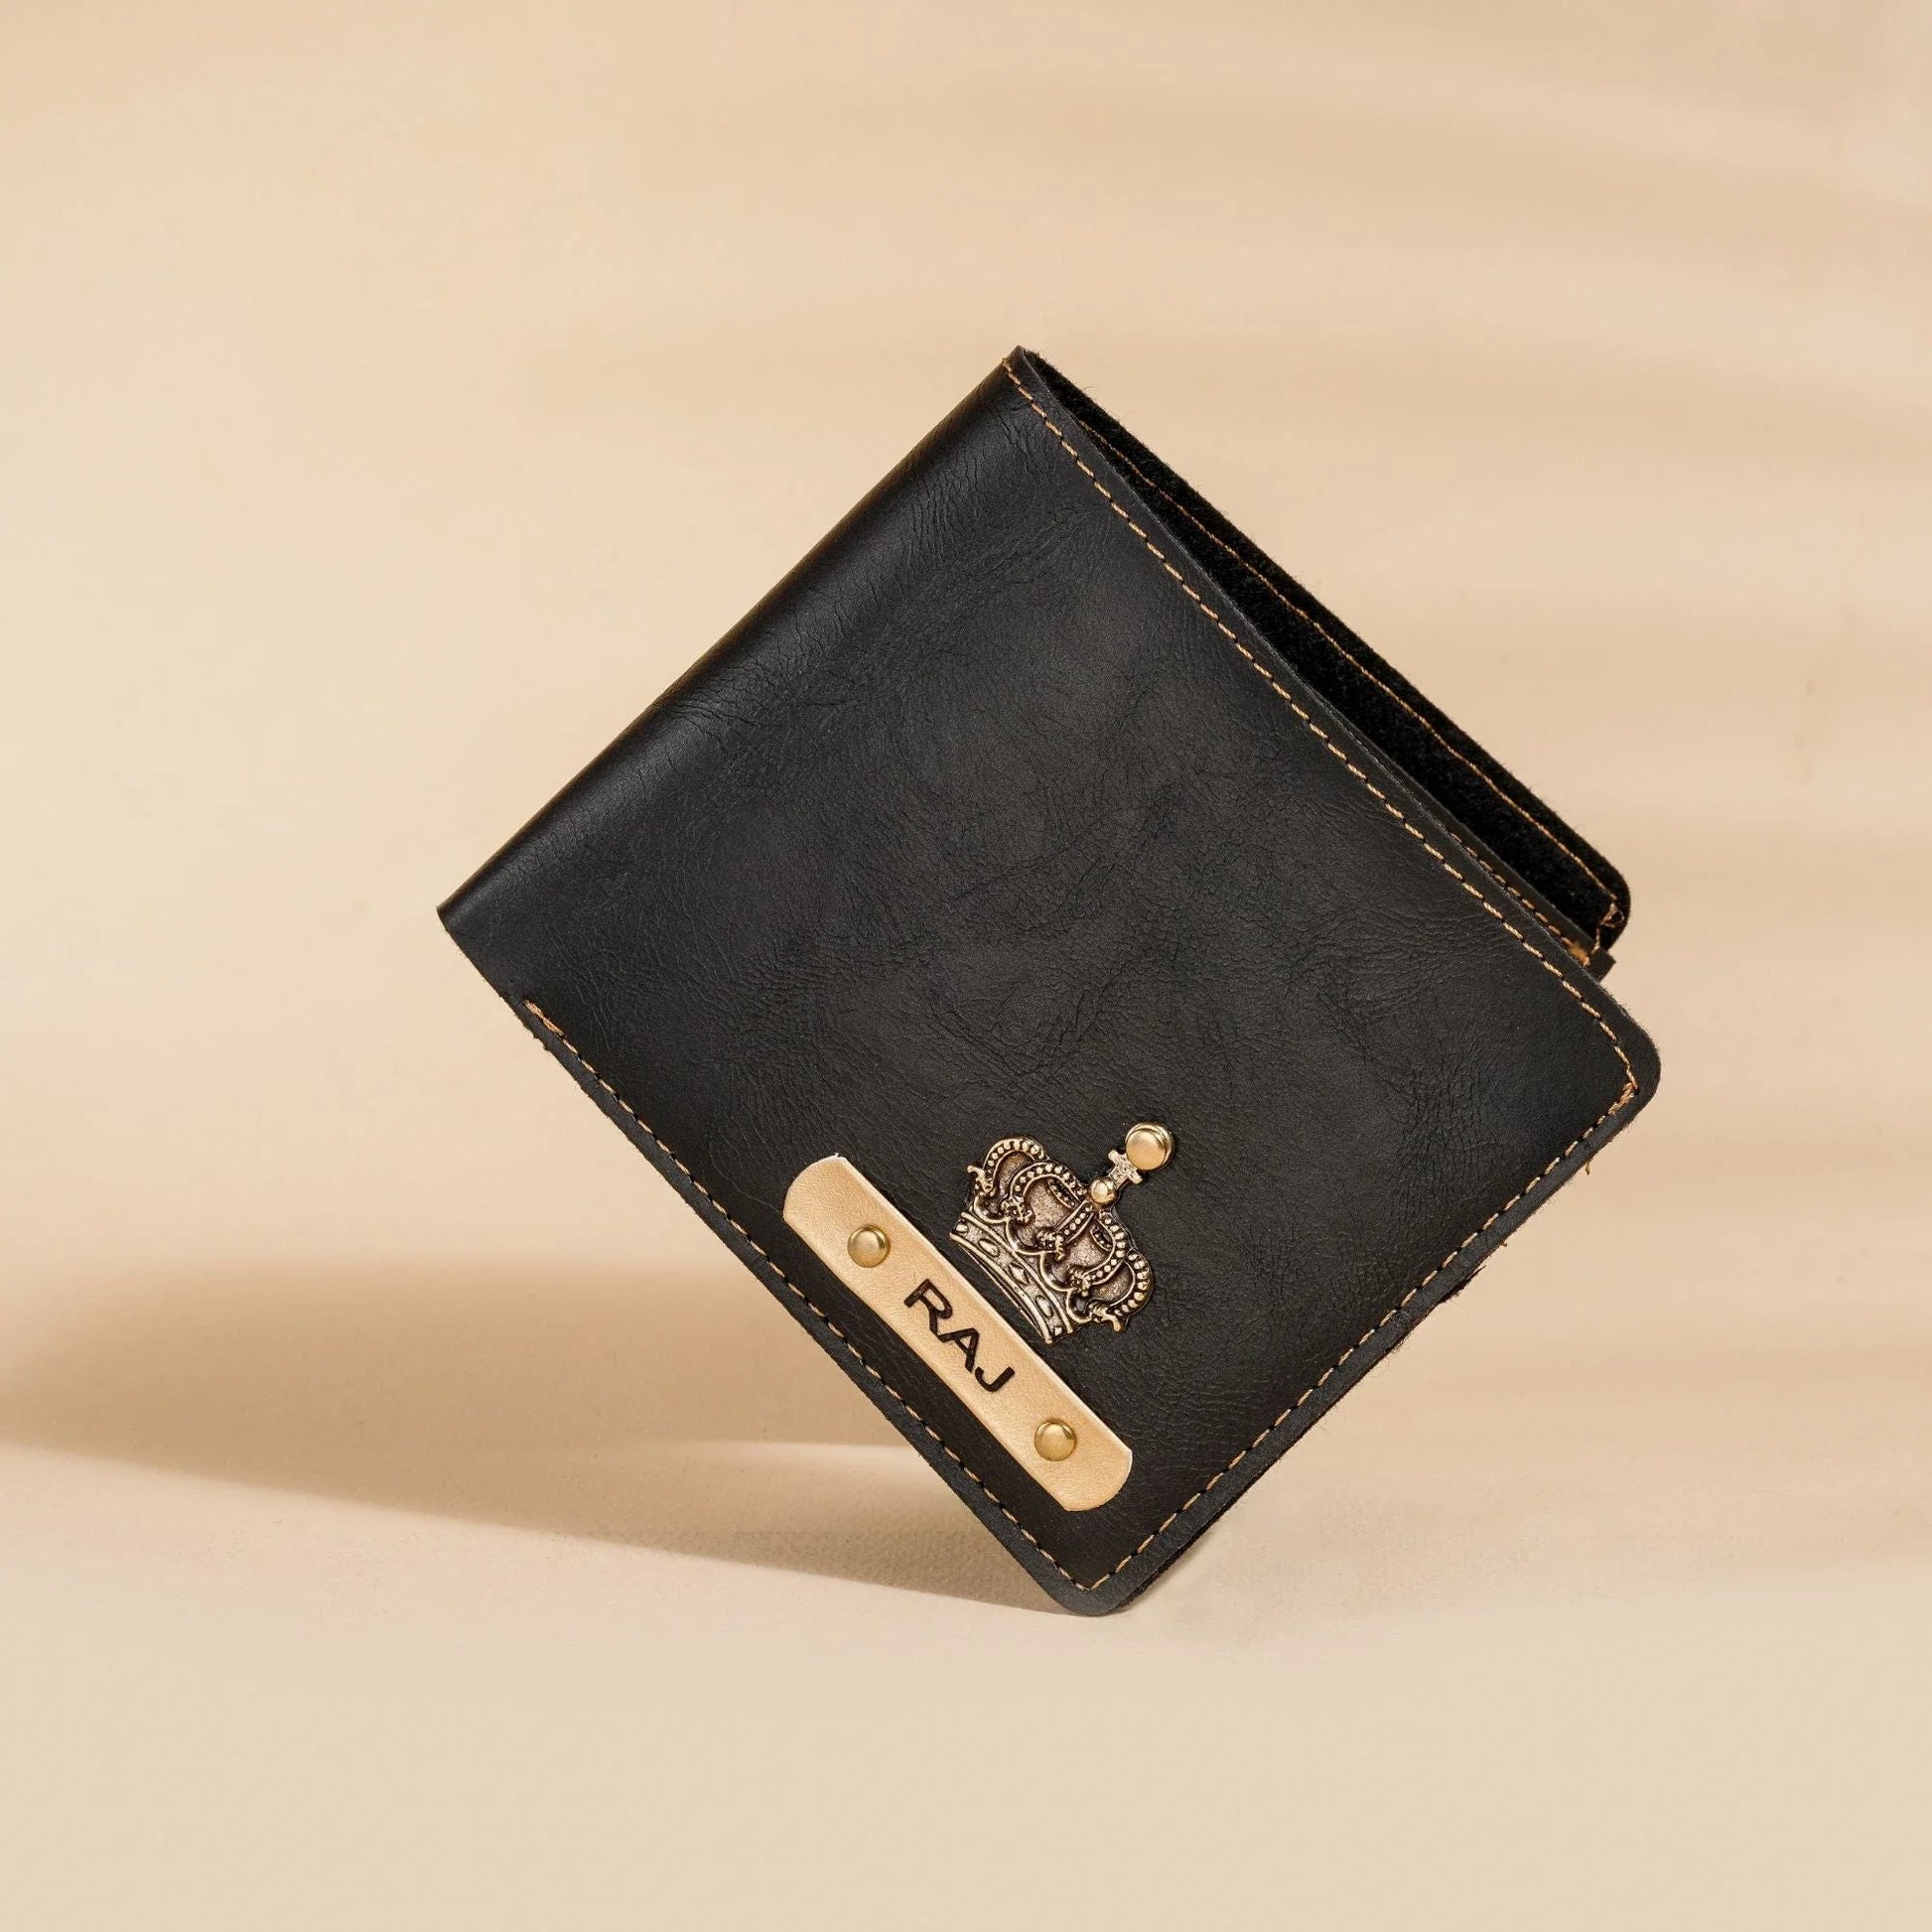 Looking for a gift that combines both style and practicality? Our customized leather wallet is the perfect choice! Each wallet is made from high-quality, genuine leather and can be personalized with your choice of initials, monogram or design.